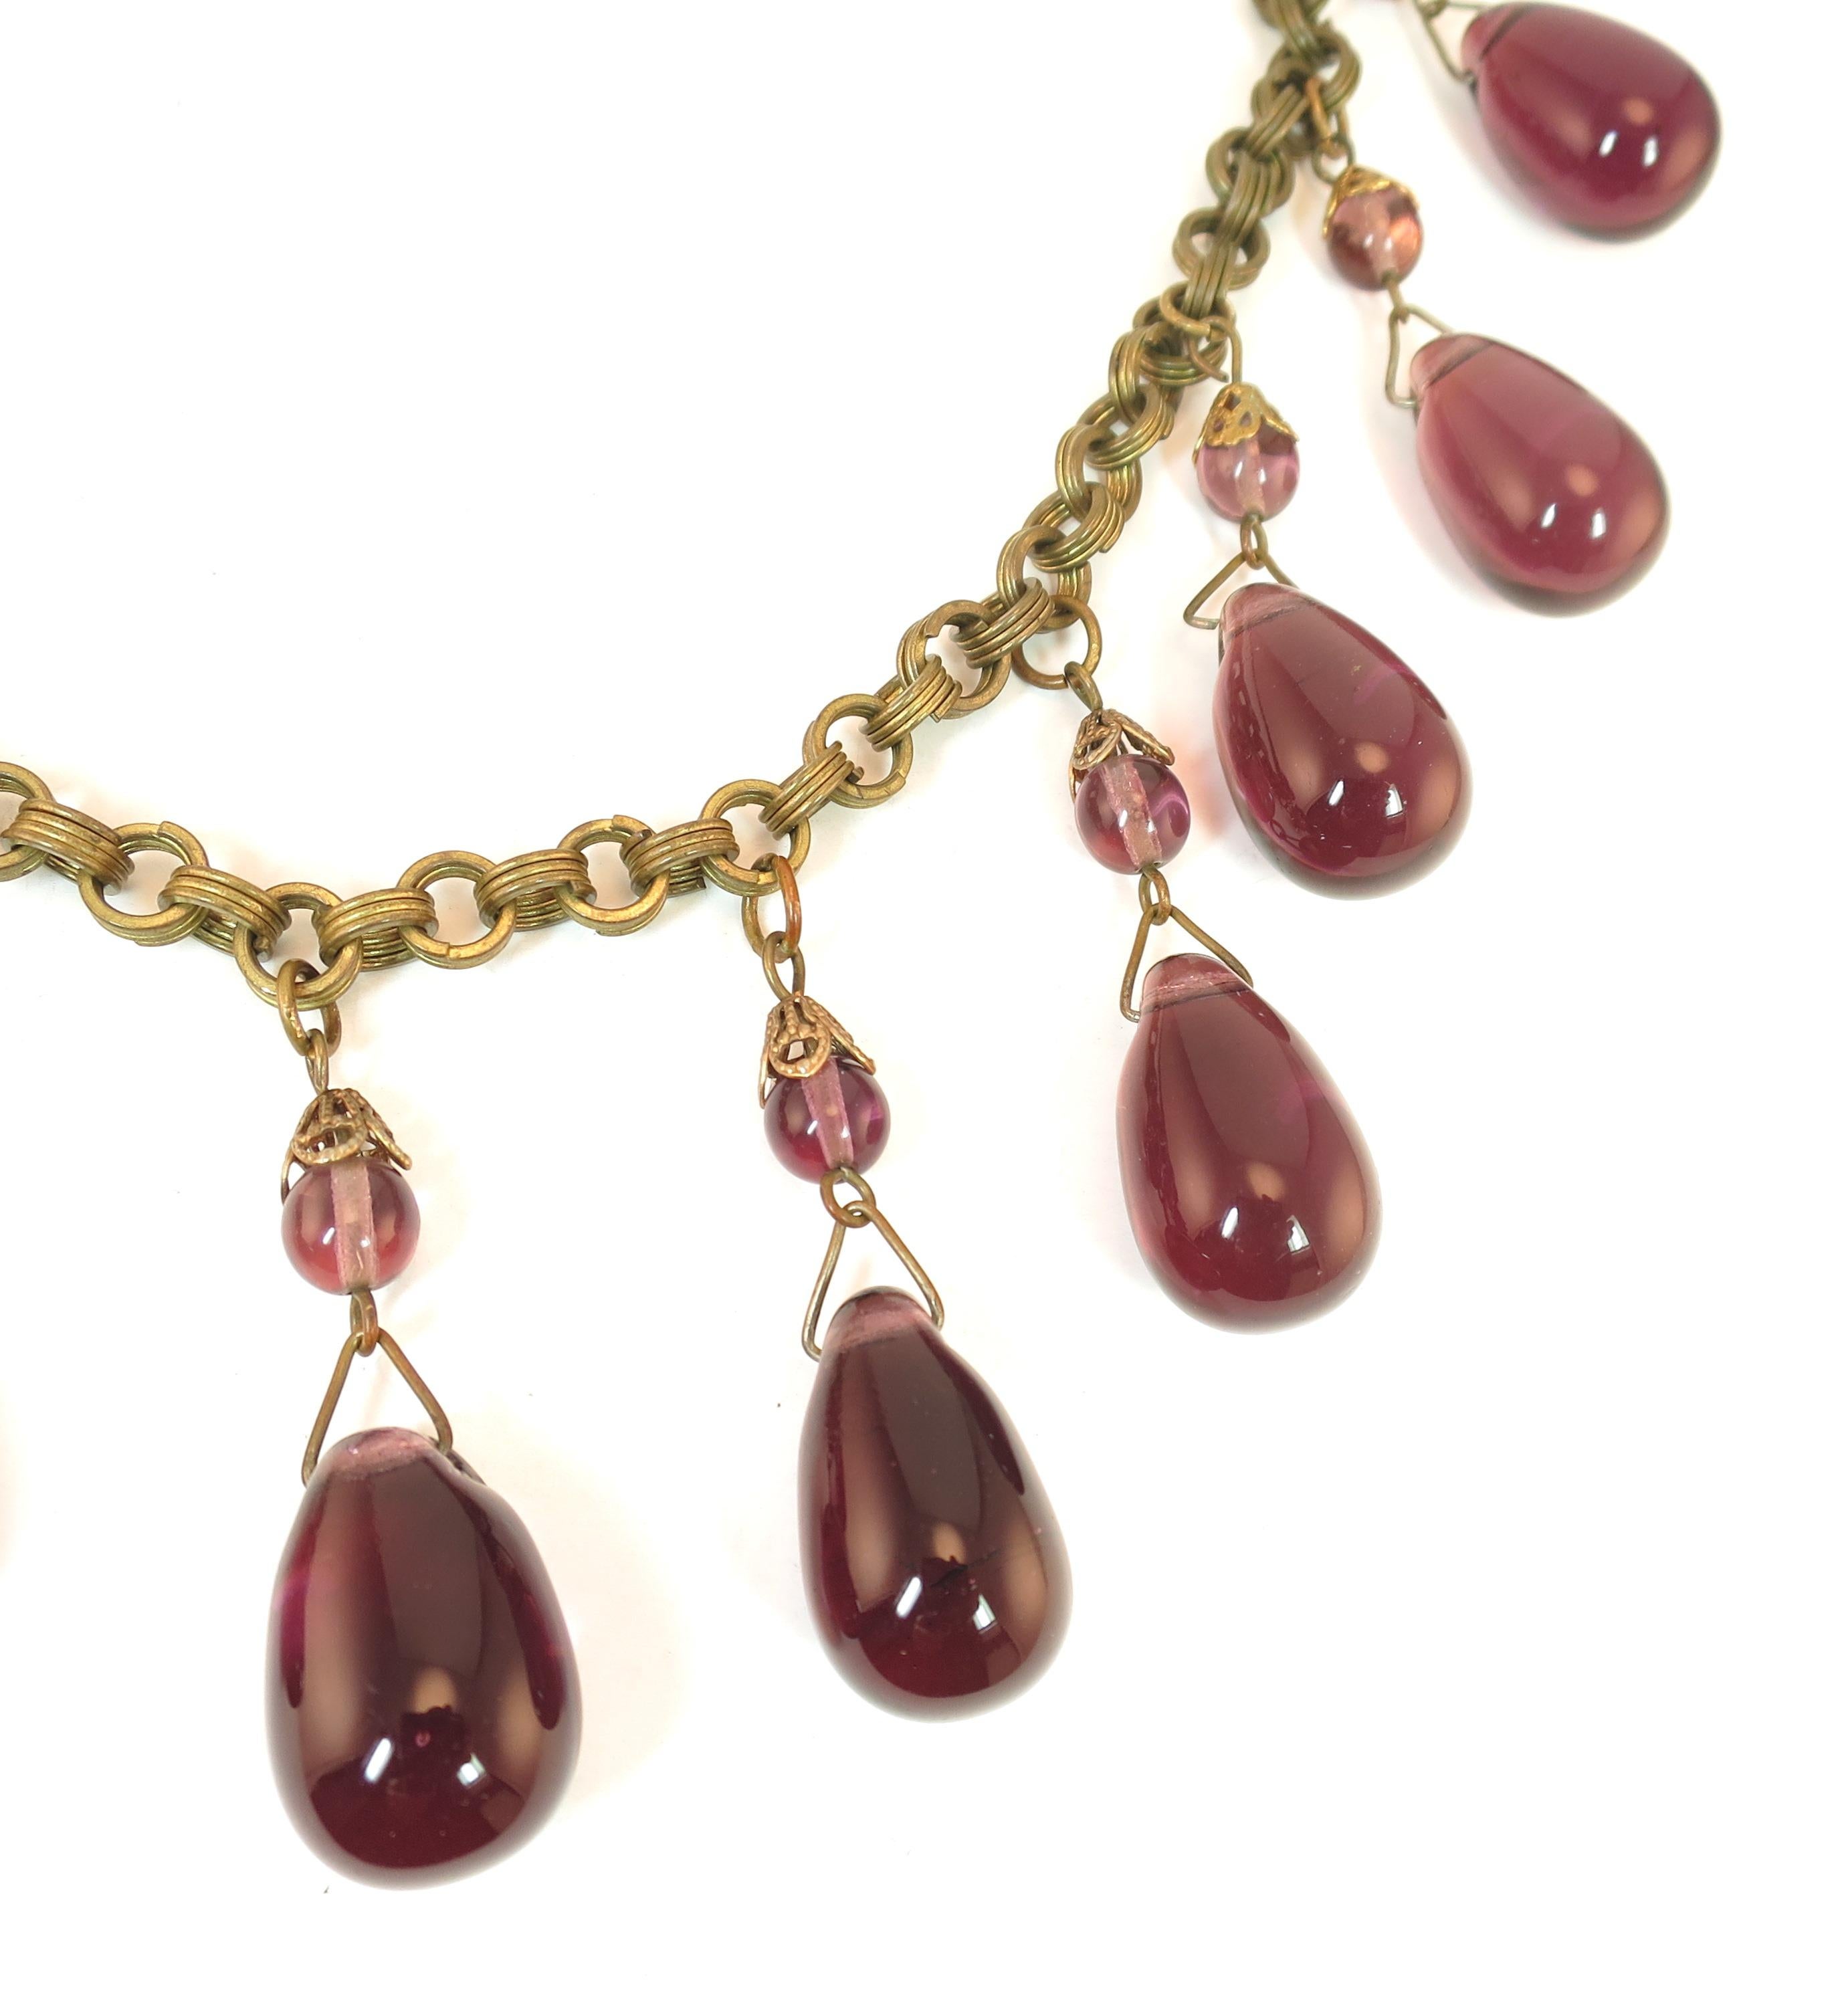 Victorian French Amethyst Poured Glass & Chain Link Necklace, 1870s For Sale 2